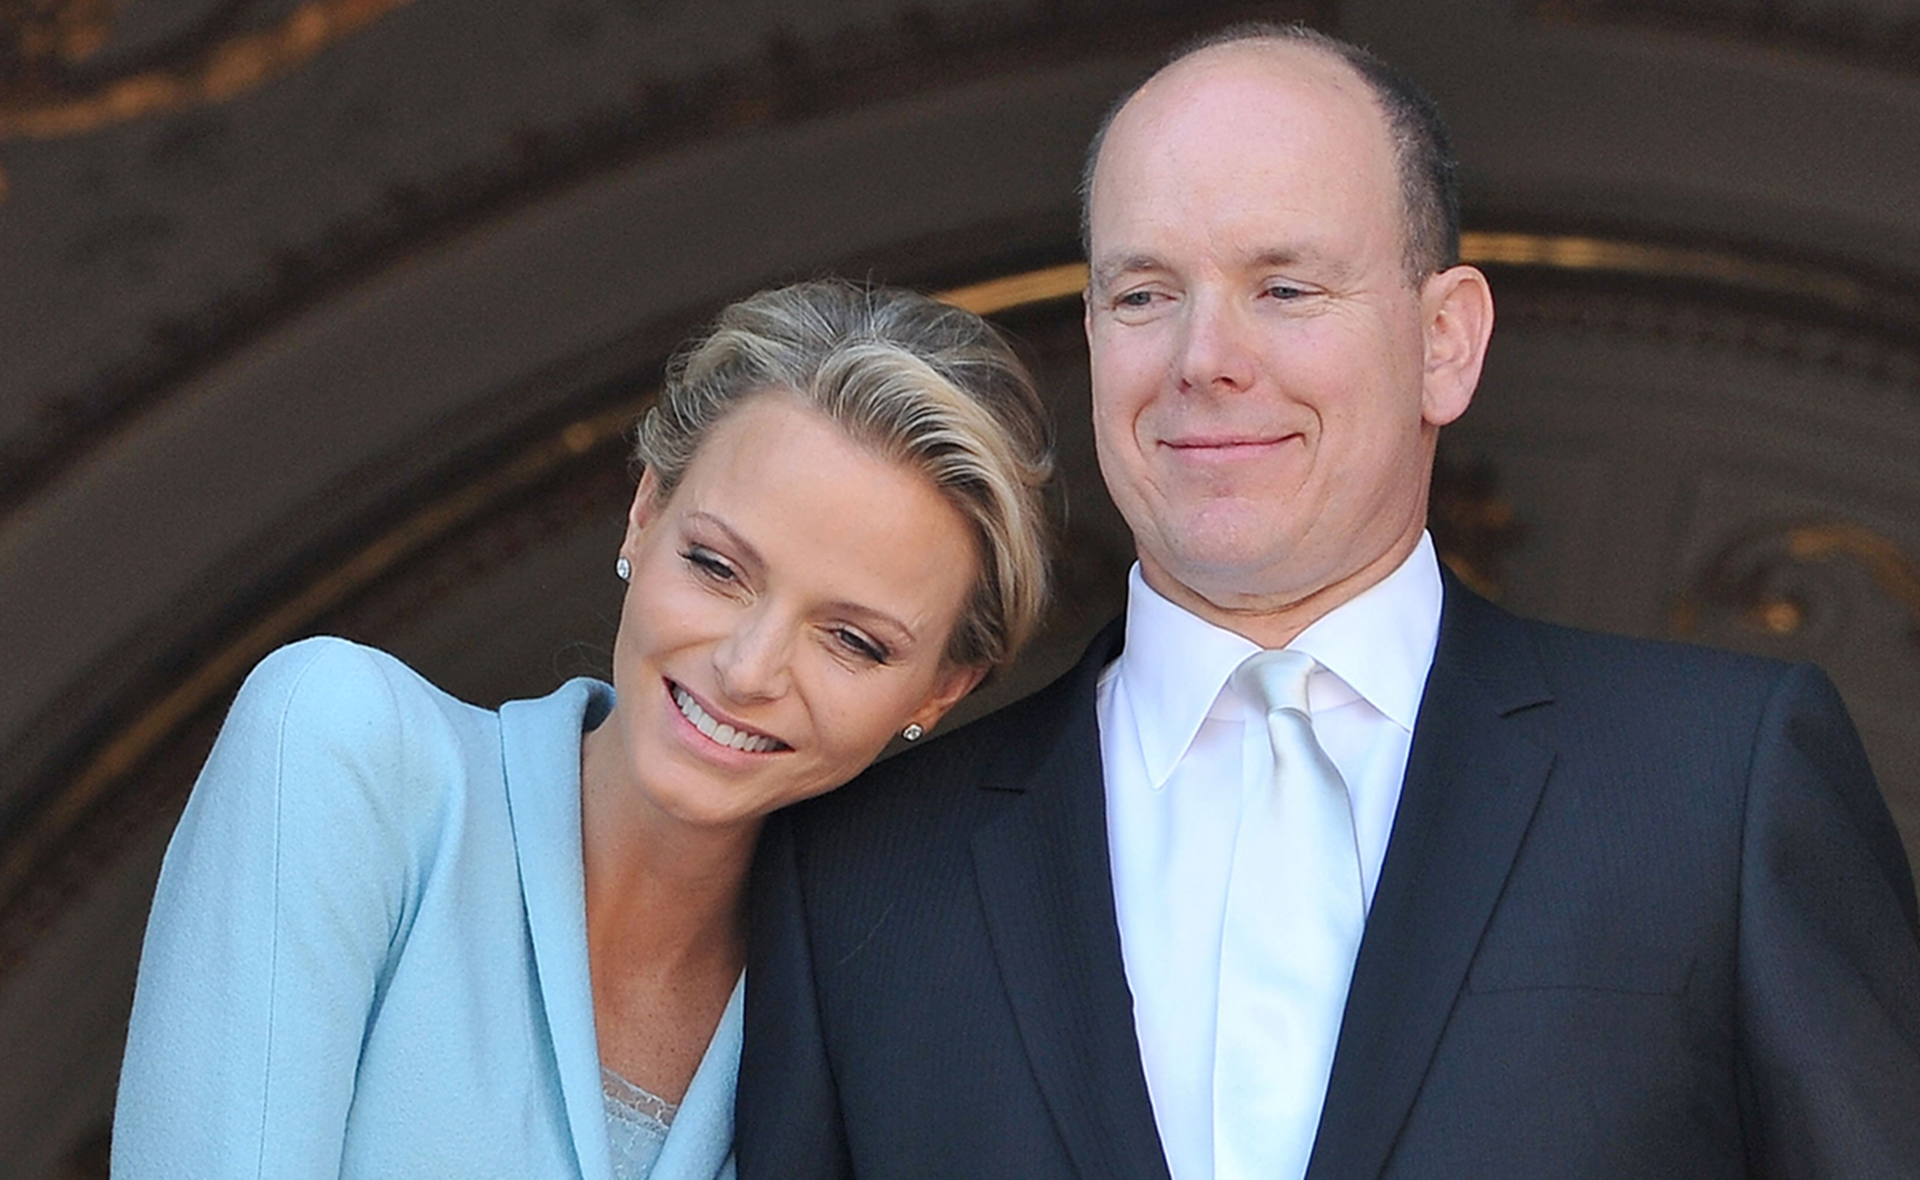 Princess Charlene’s joy as she reunites with her husband and children after painful illness separated them for months